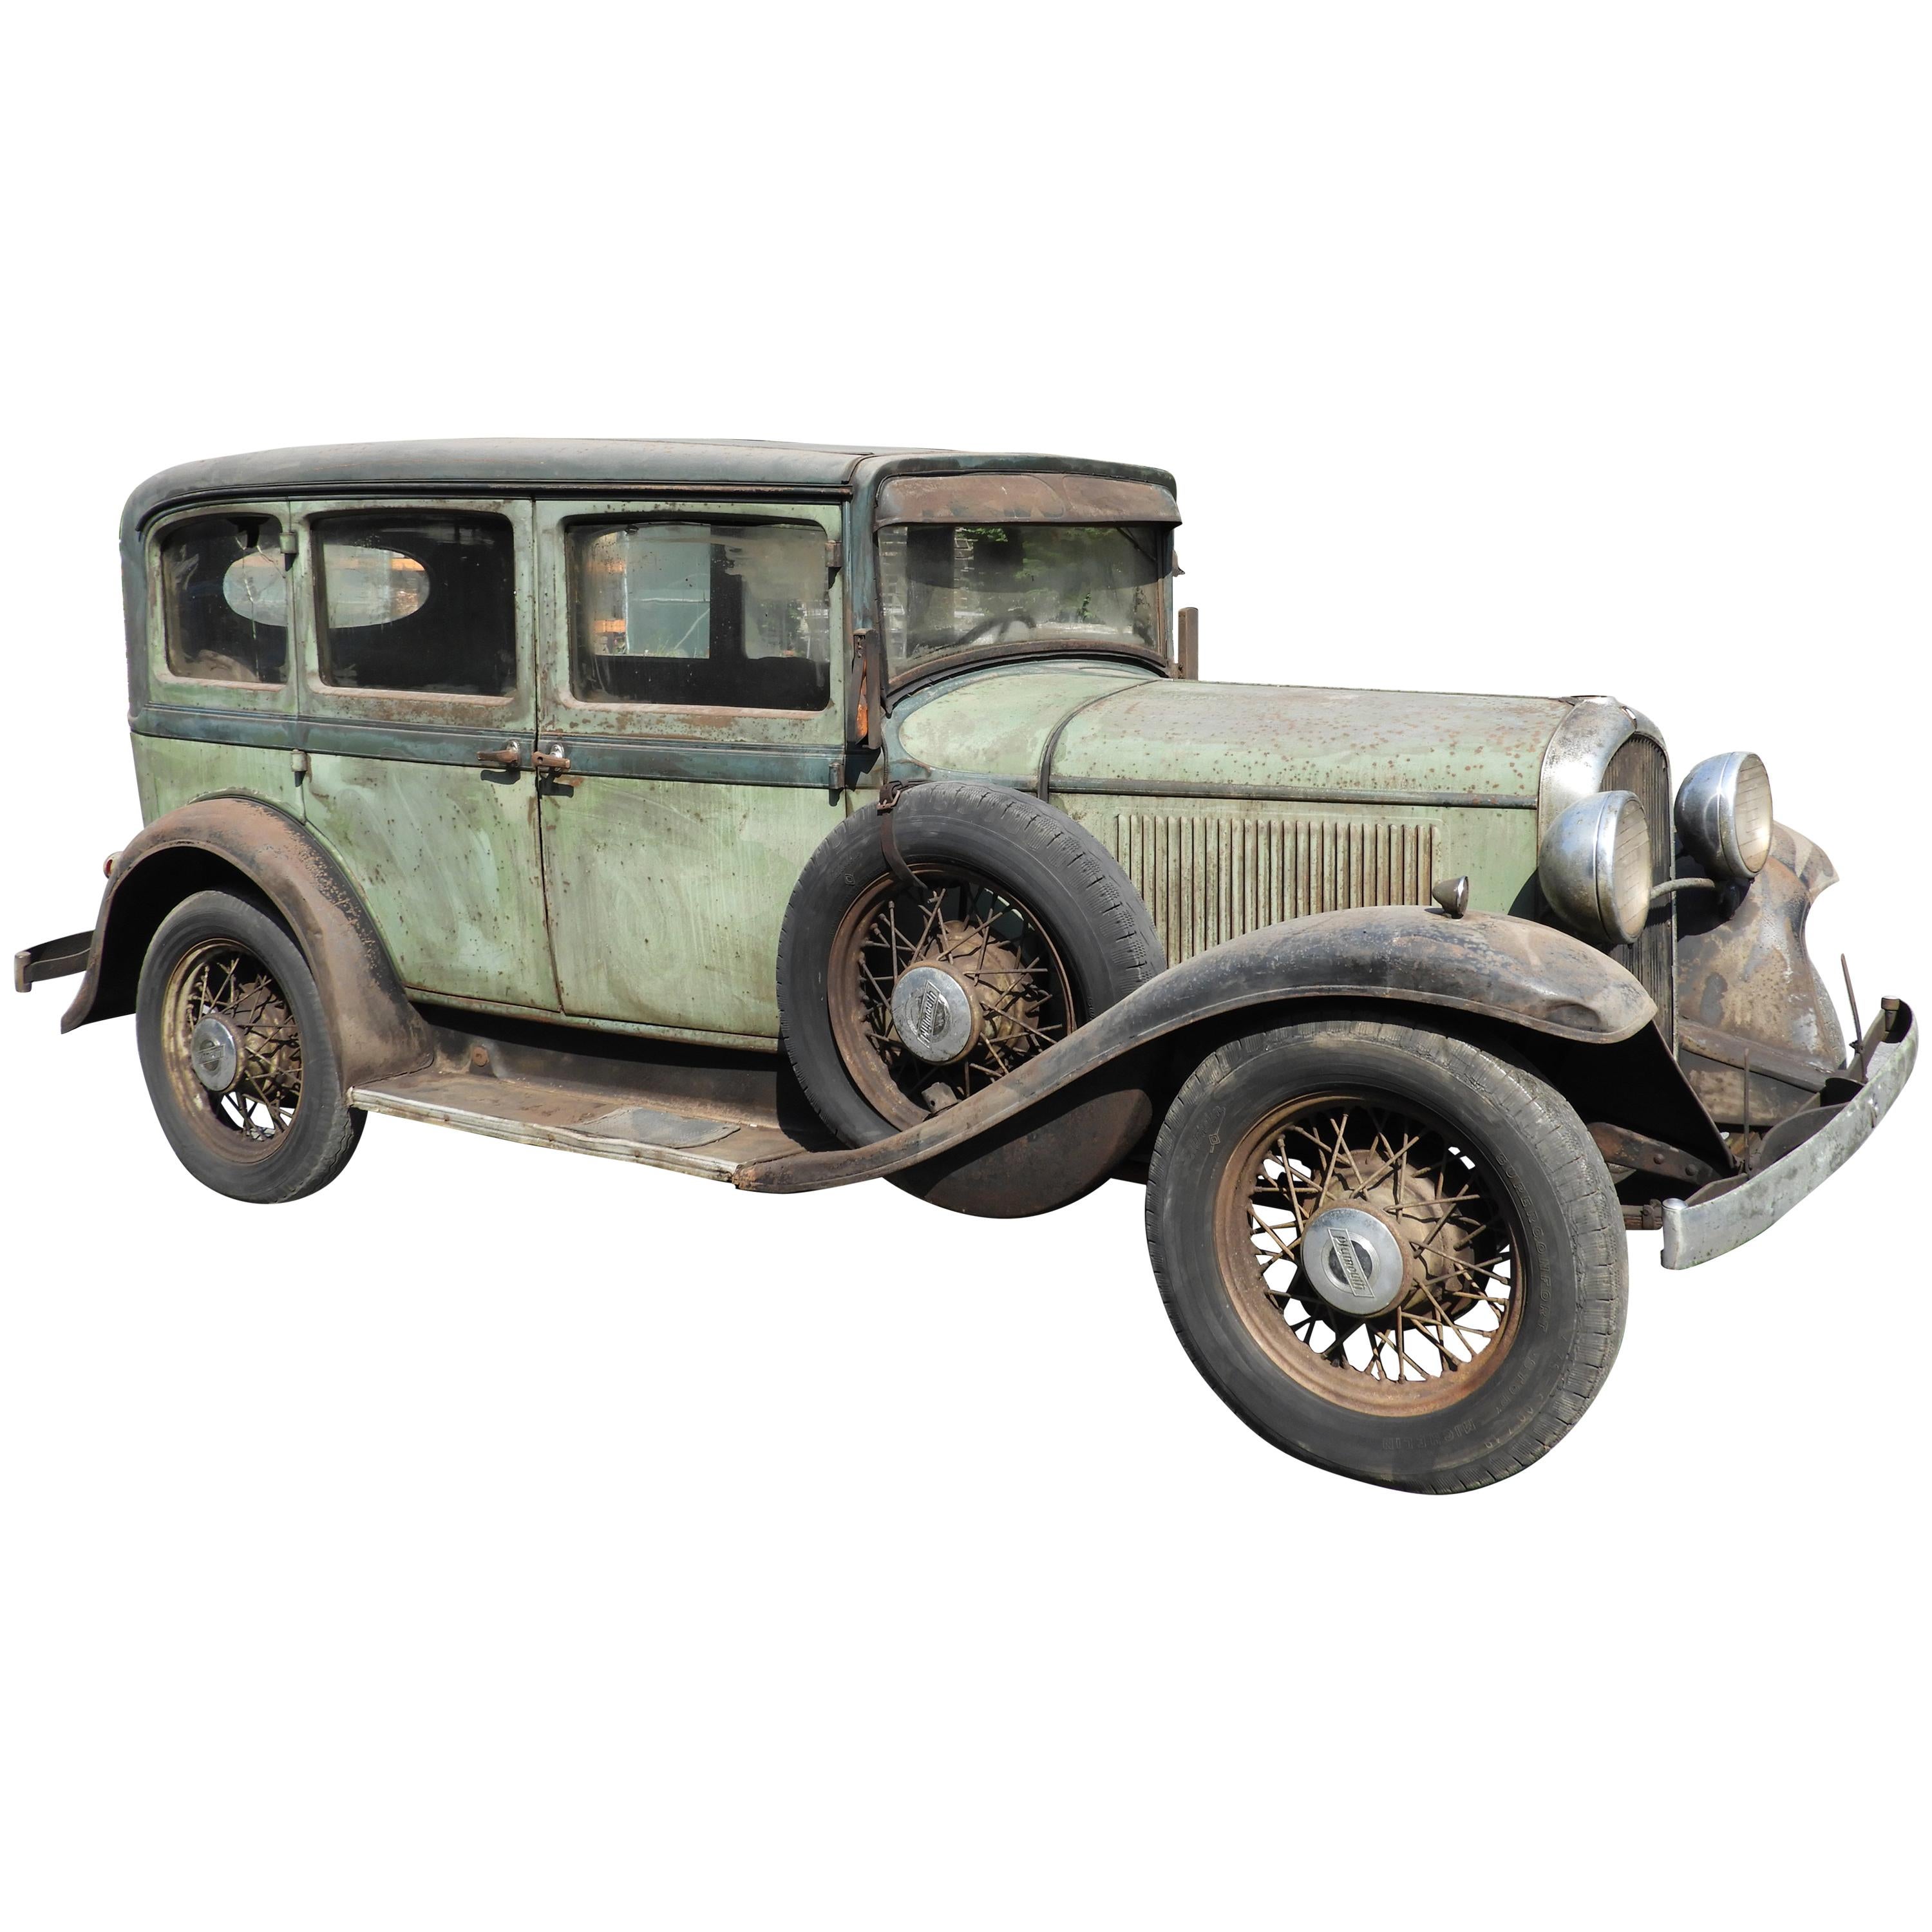 1932 Plymouh Commercial Original Patina Car For Sale